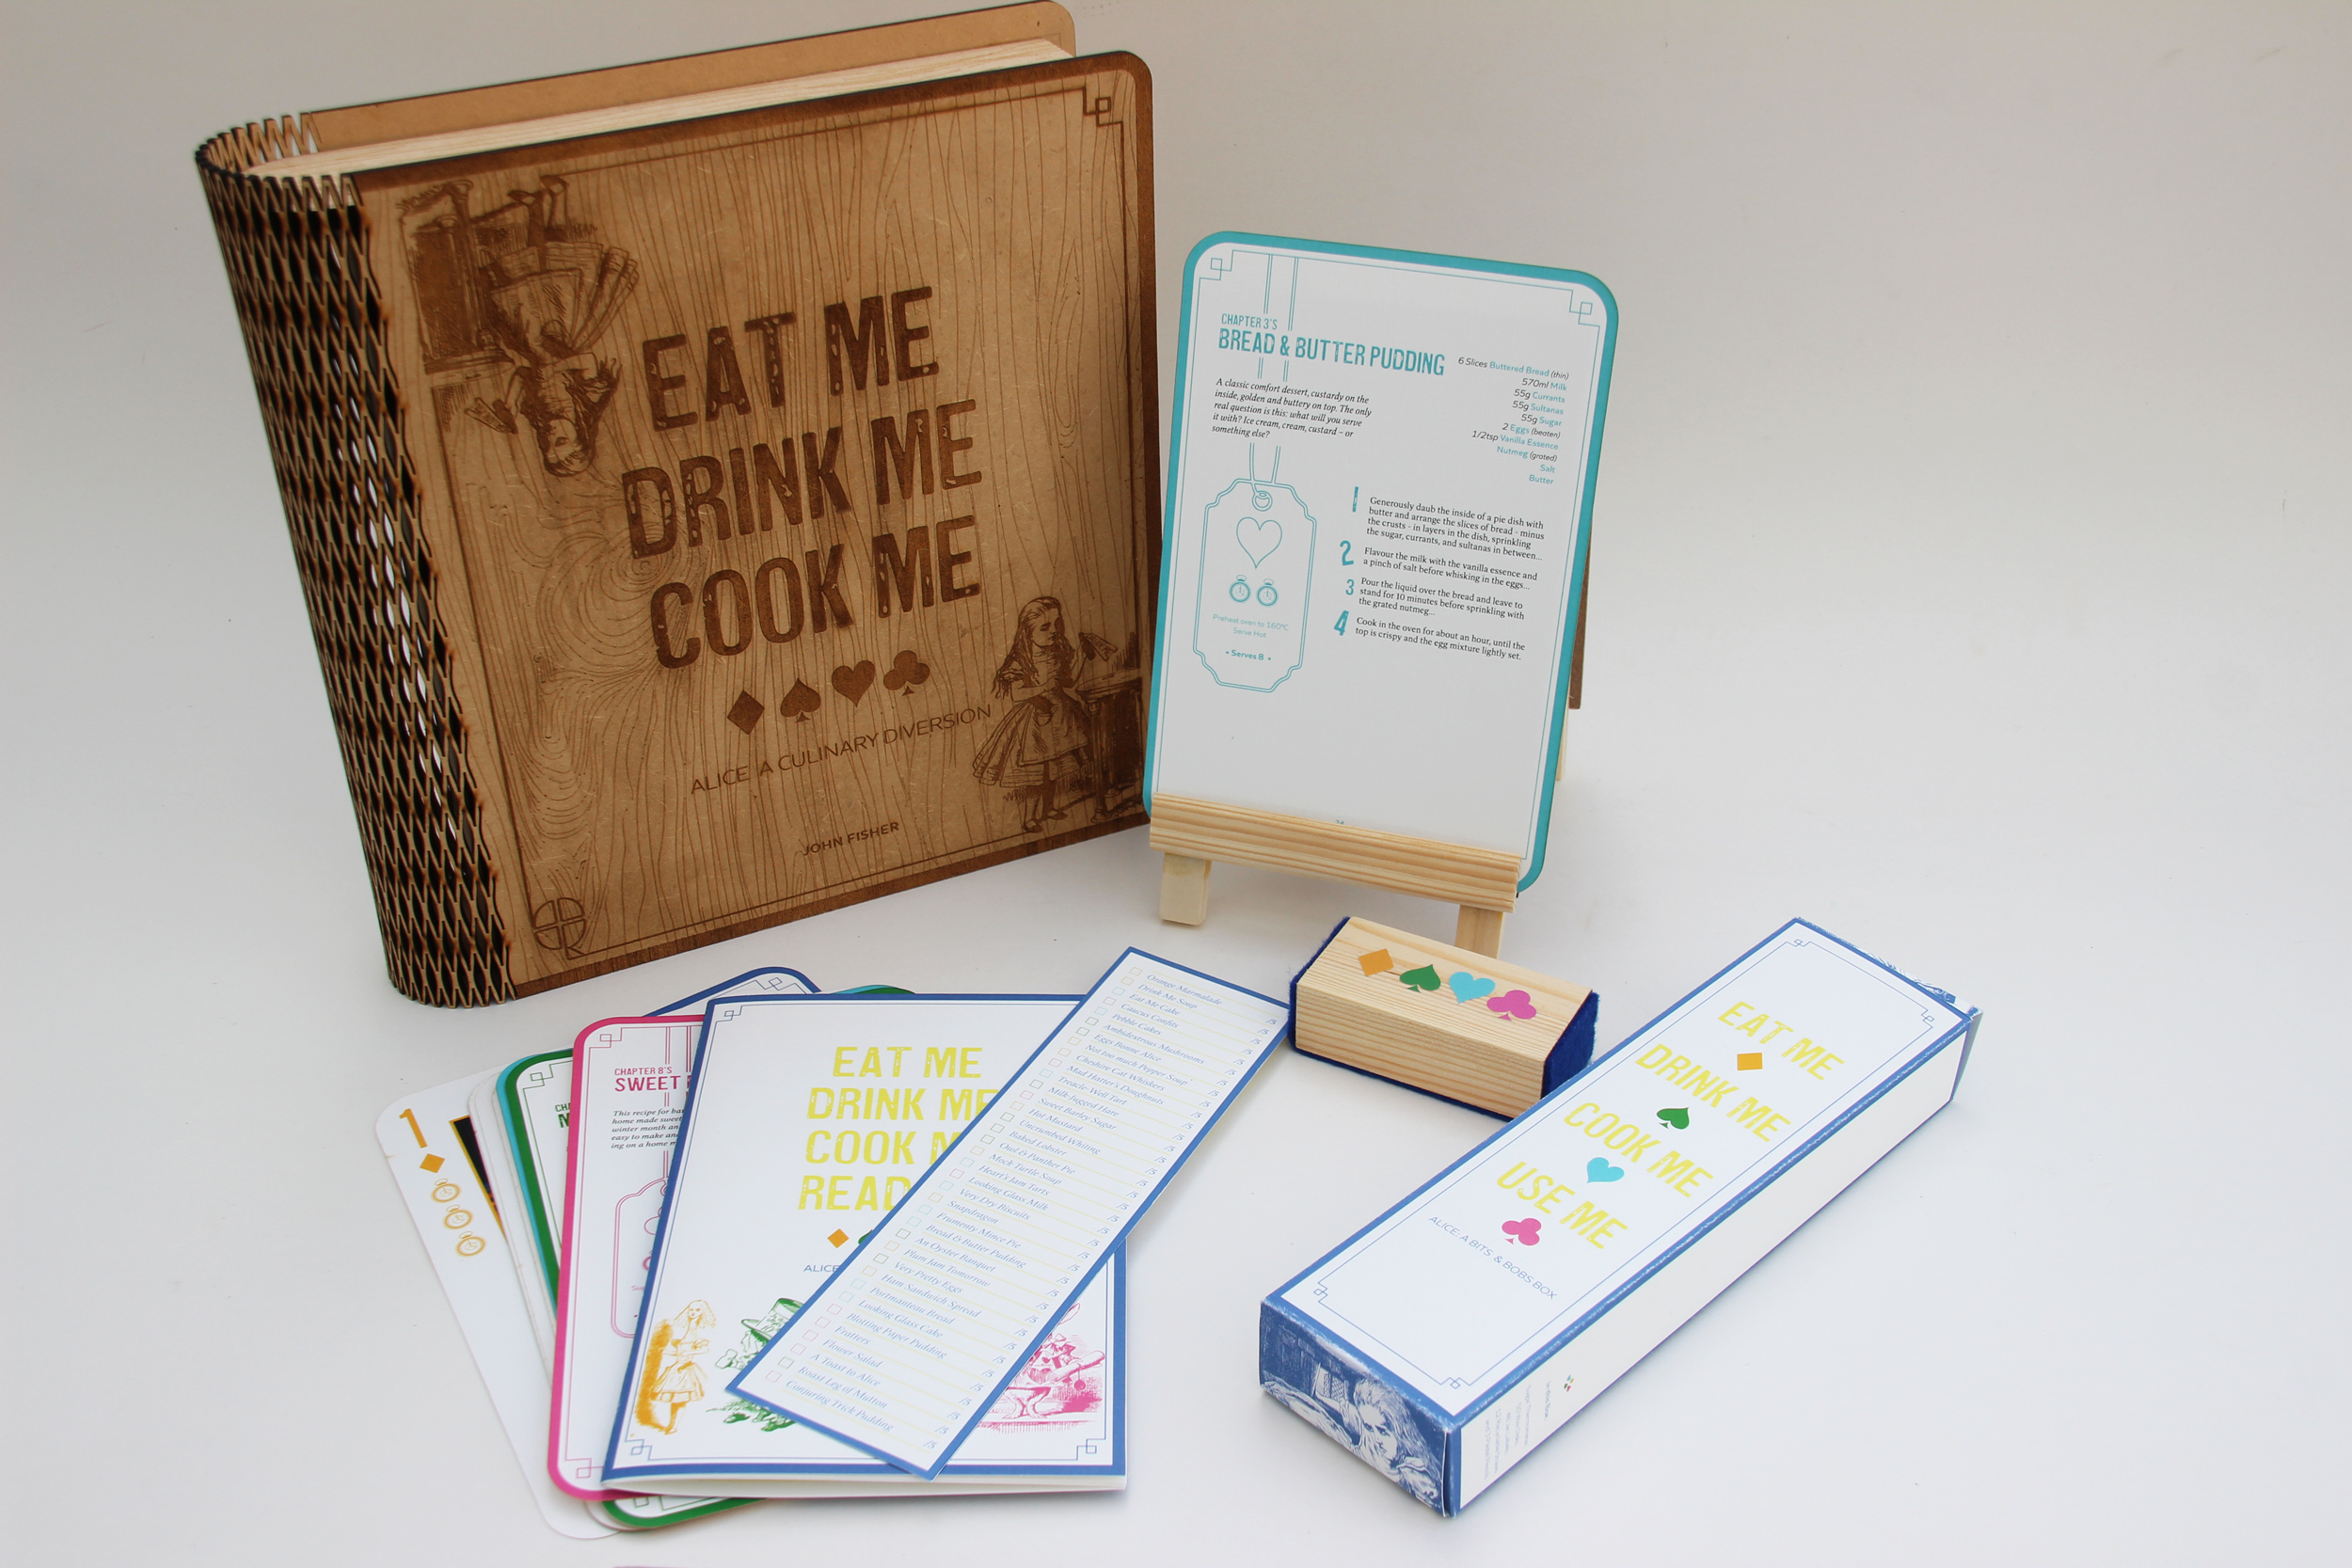 BA Design for Publishing work by Hannah Goldsmith showing an Alice in Wonderland inspired Cookbook Set. Including an engraved wooden box, Recipe Cards and a small chalkboard card stand.